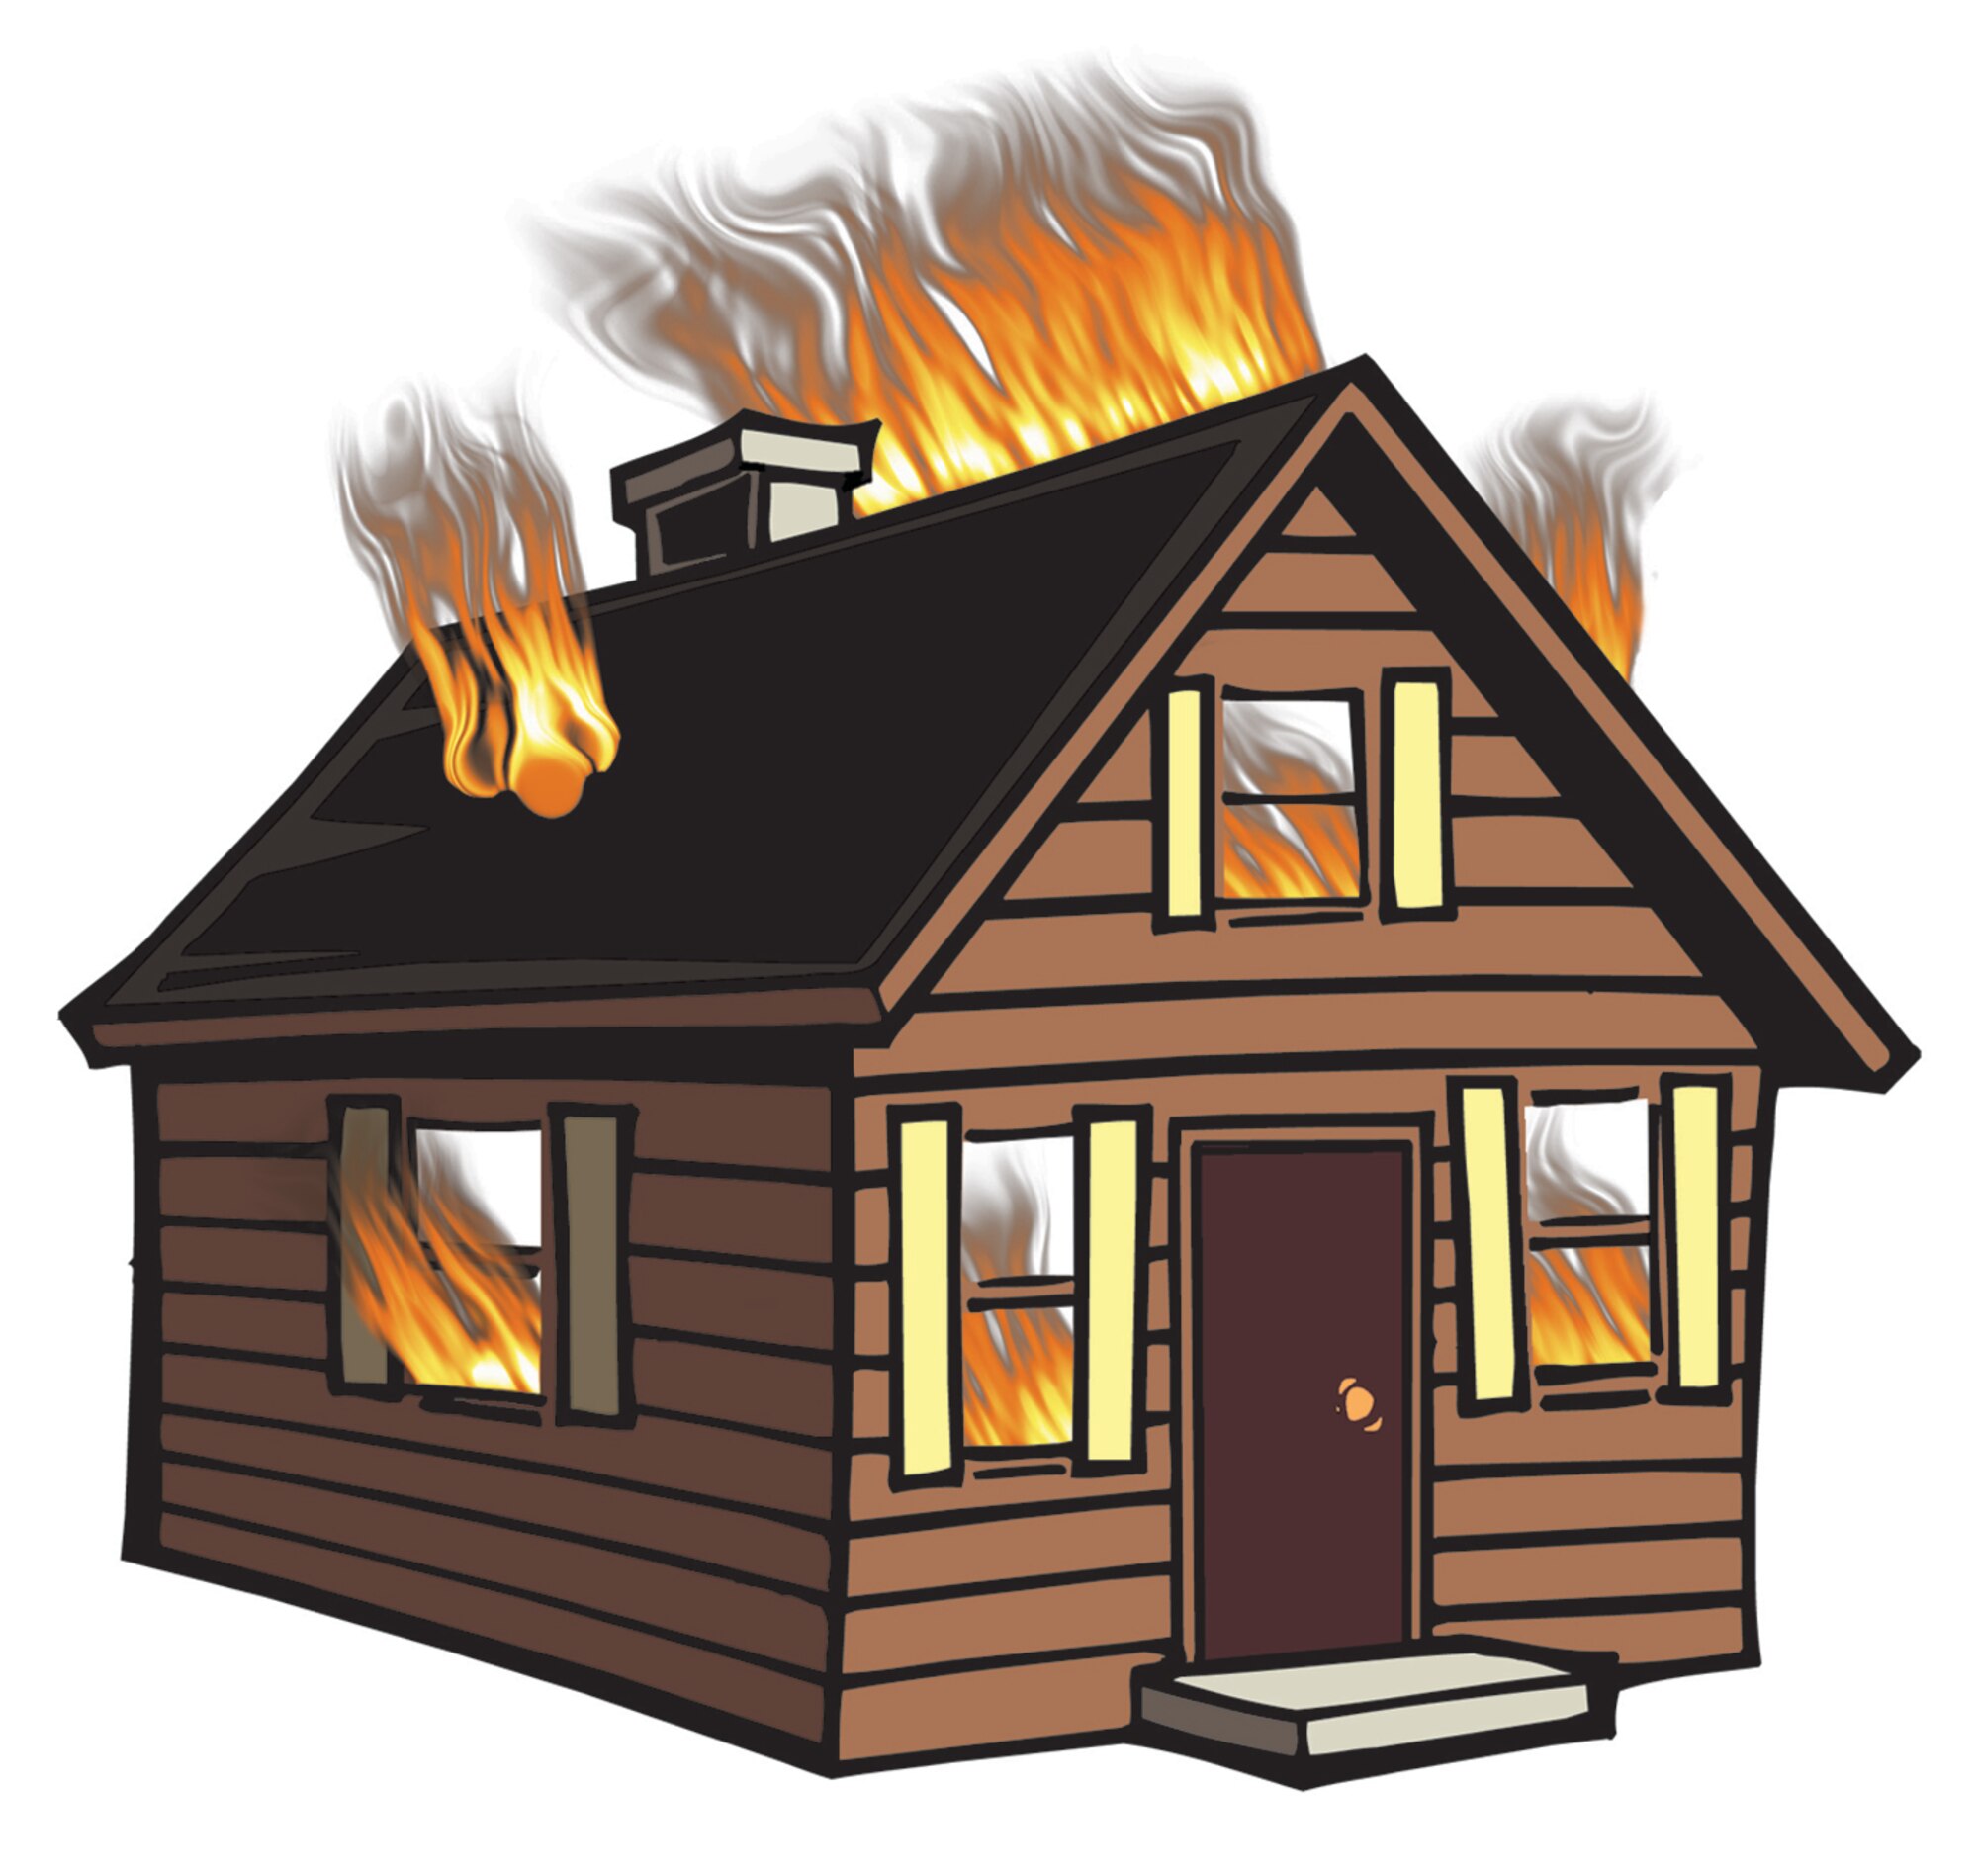 MOST HOME FIRE DEATHS HAPPEN IN PROPERTIES WITHOUT WORKING SMOKE ALARMS (File Art)